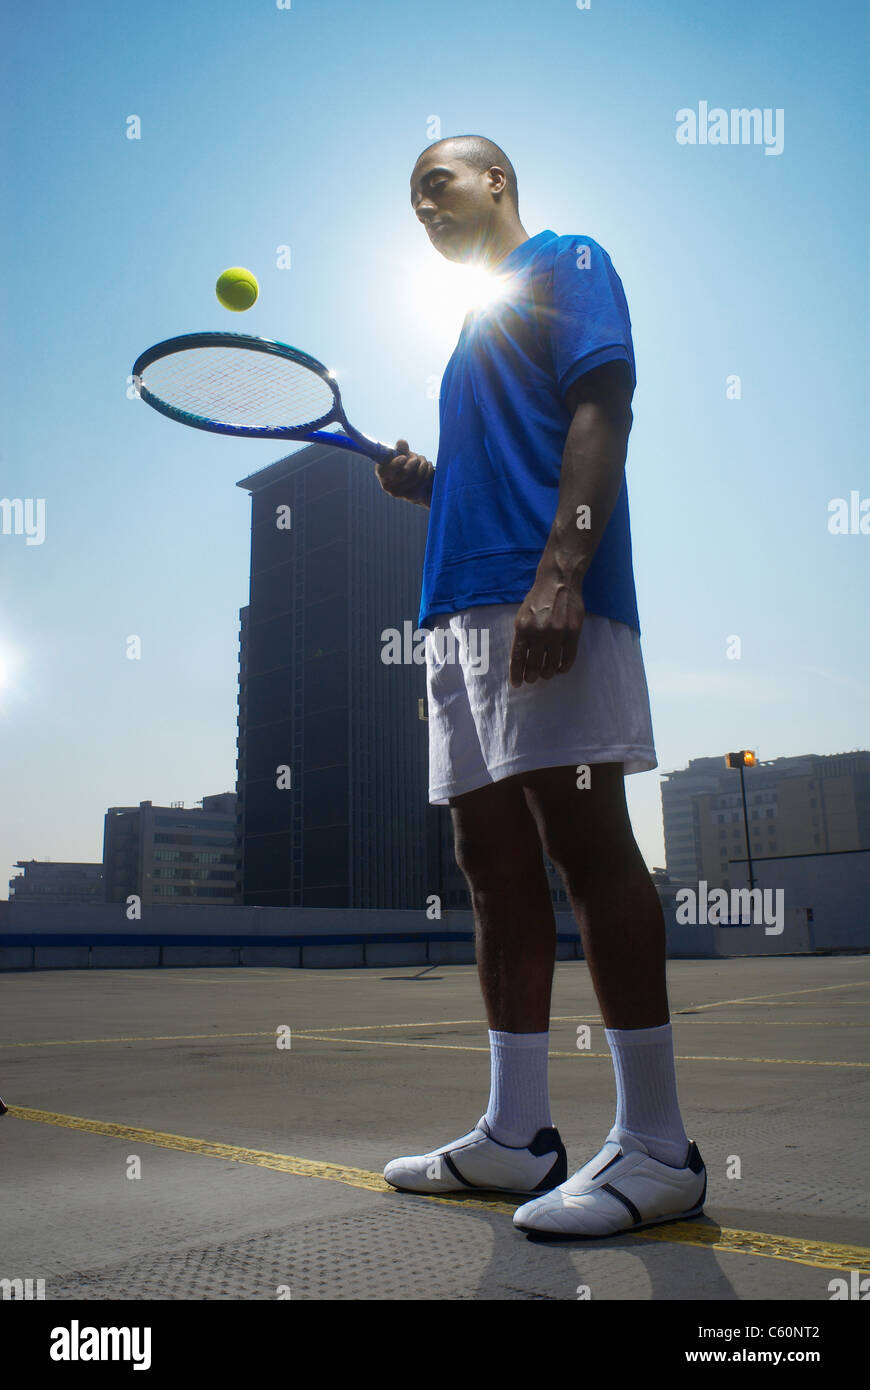 Tennis player on rooftop court Stock Photo